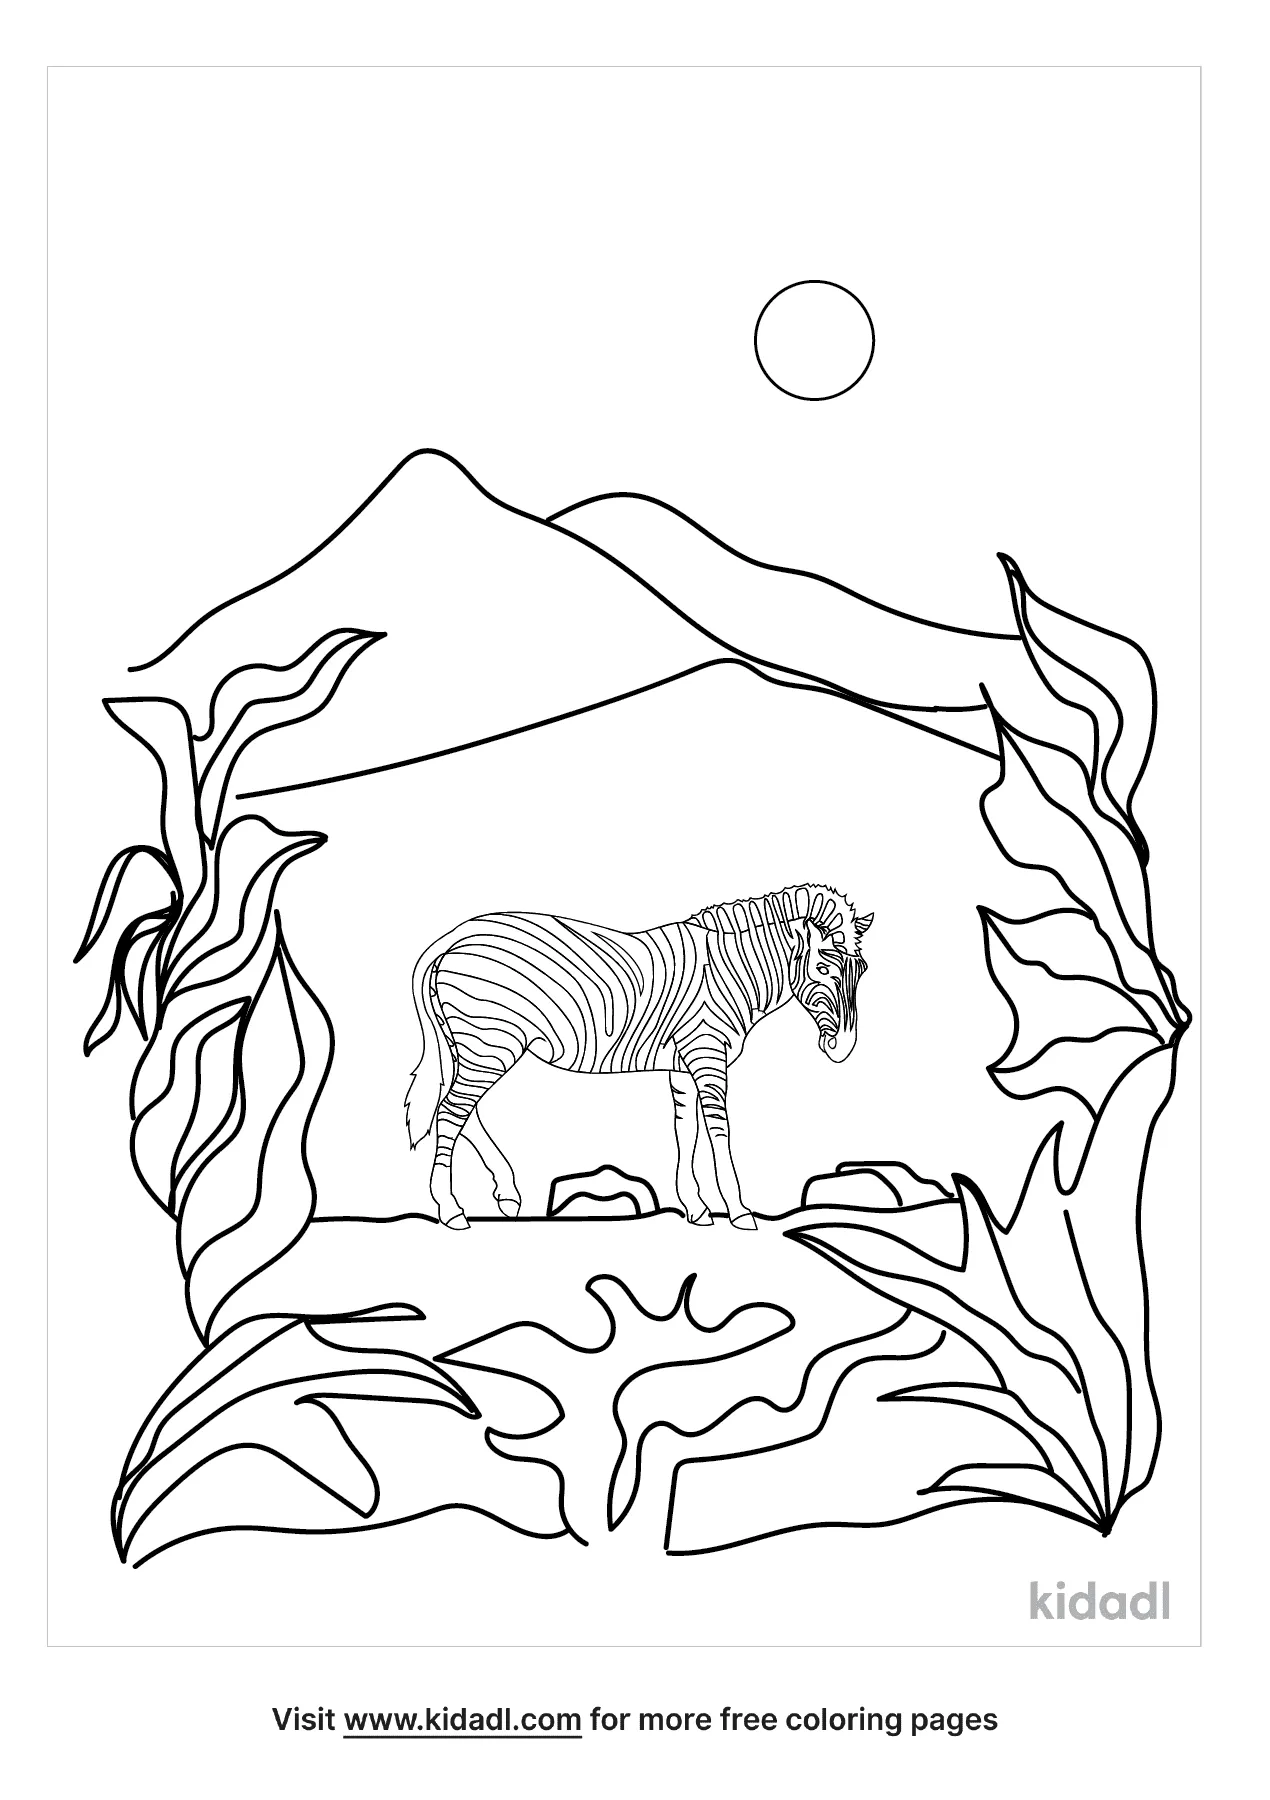 Grassland Coloring Pages   Free Environment and nature Coloring ...